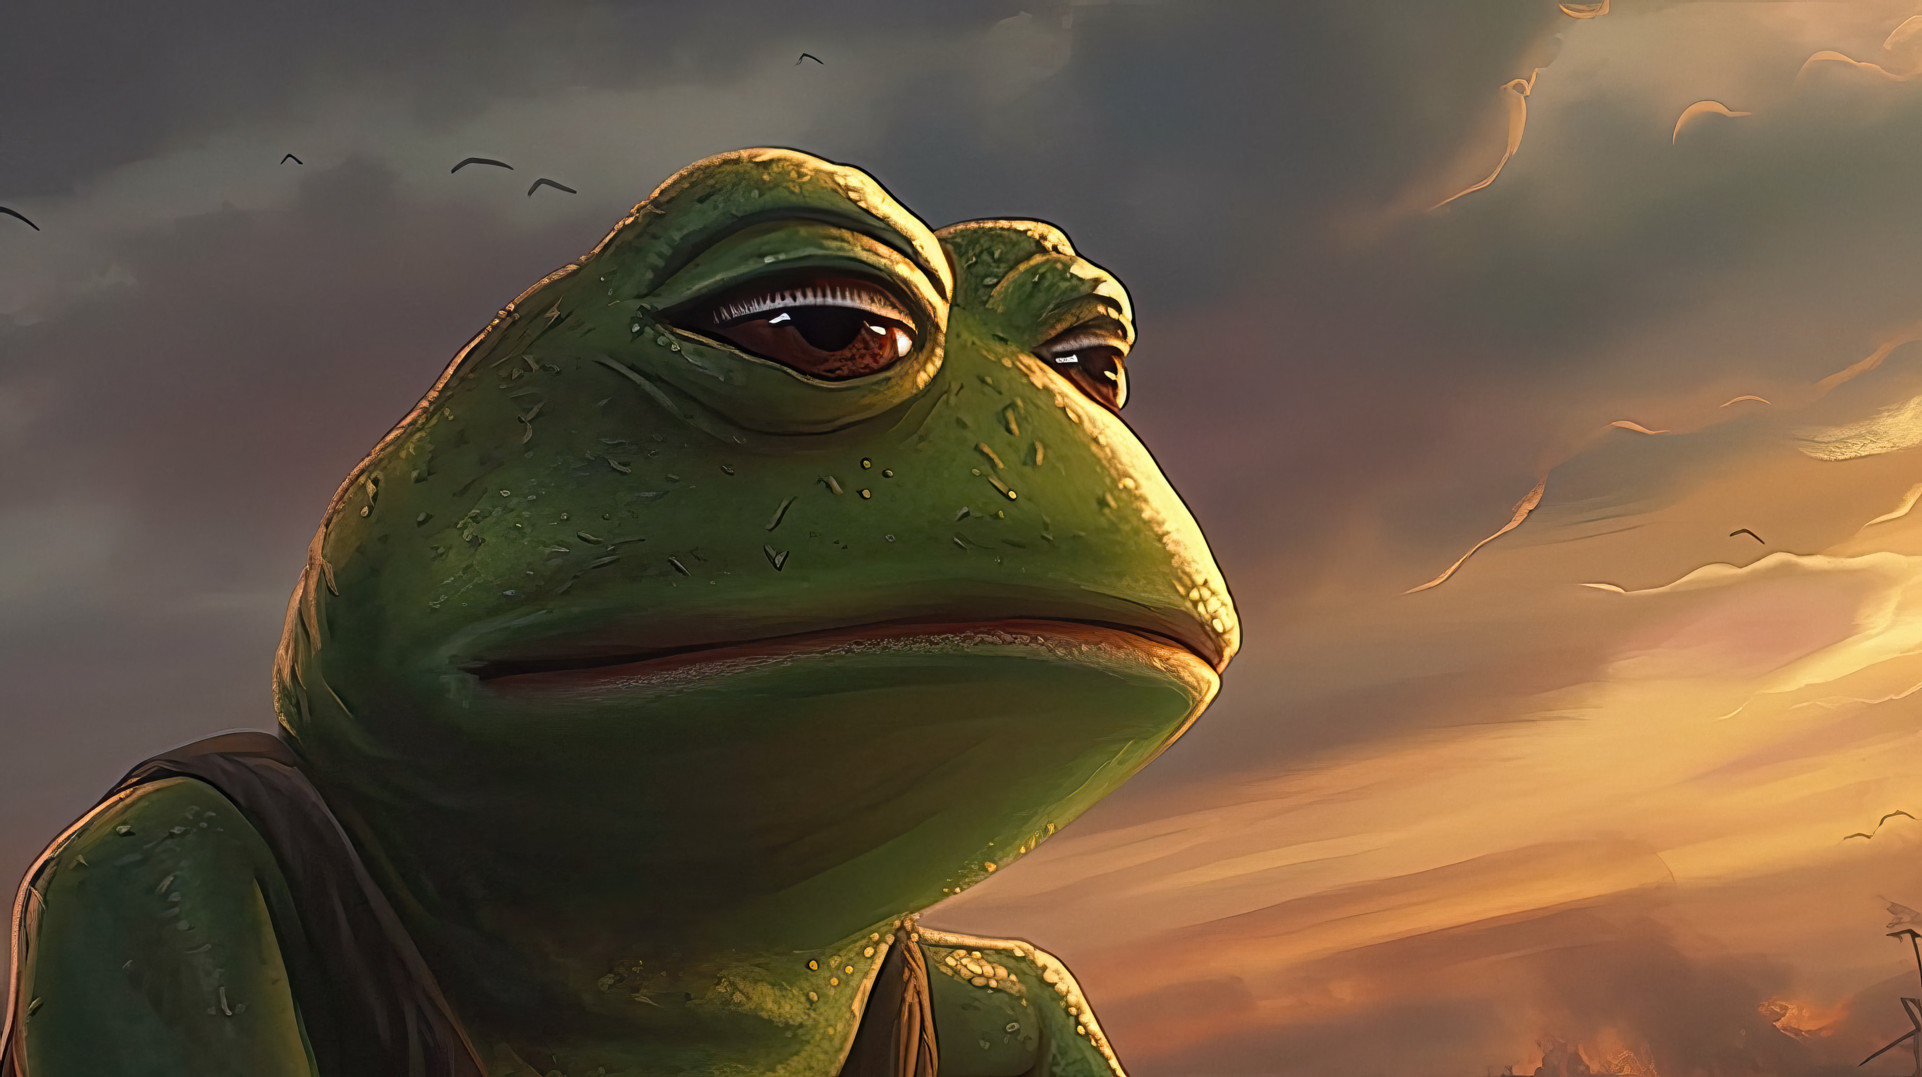 Pepe Wallpaper Gifts & Merchandise for Sale | Redbubble